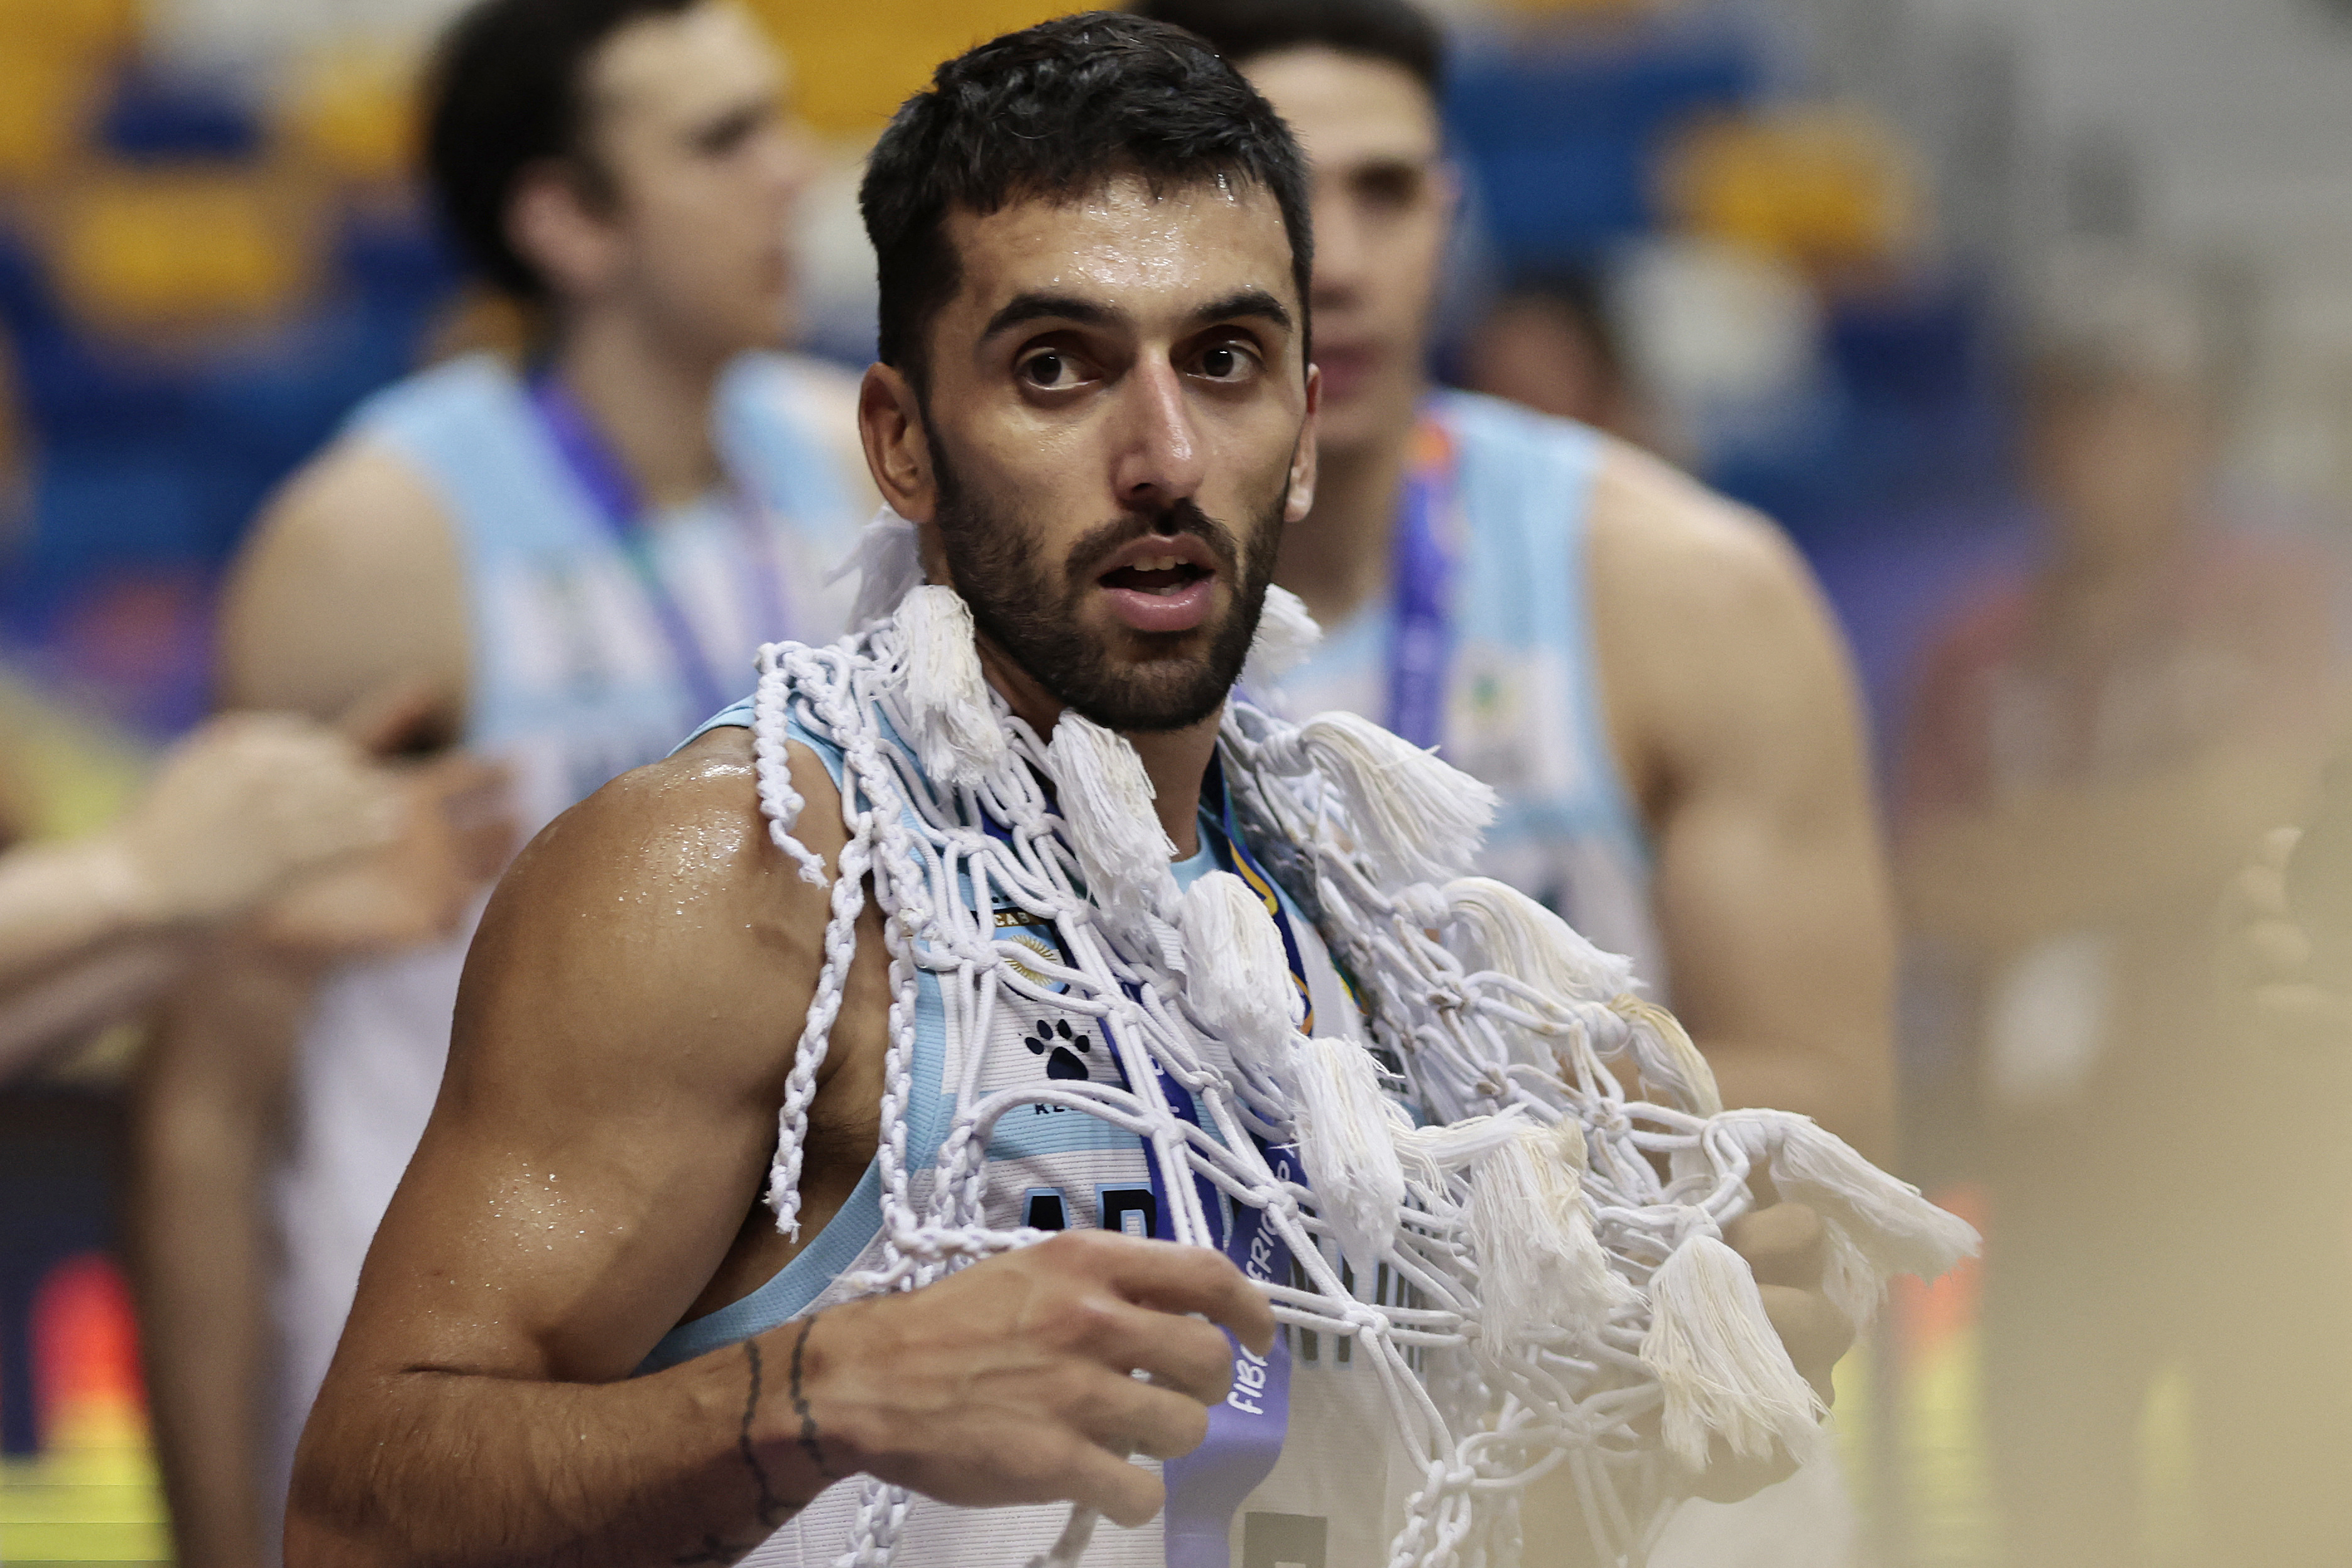 Campazzo cut the net from one of the rings and took it as a souvenir (REUTERS / Ueslei Marcelino)